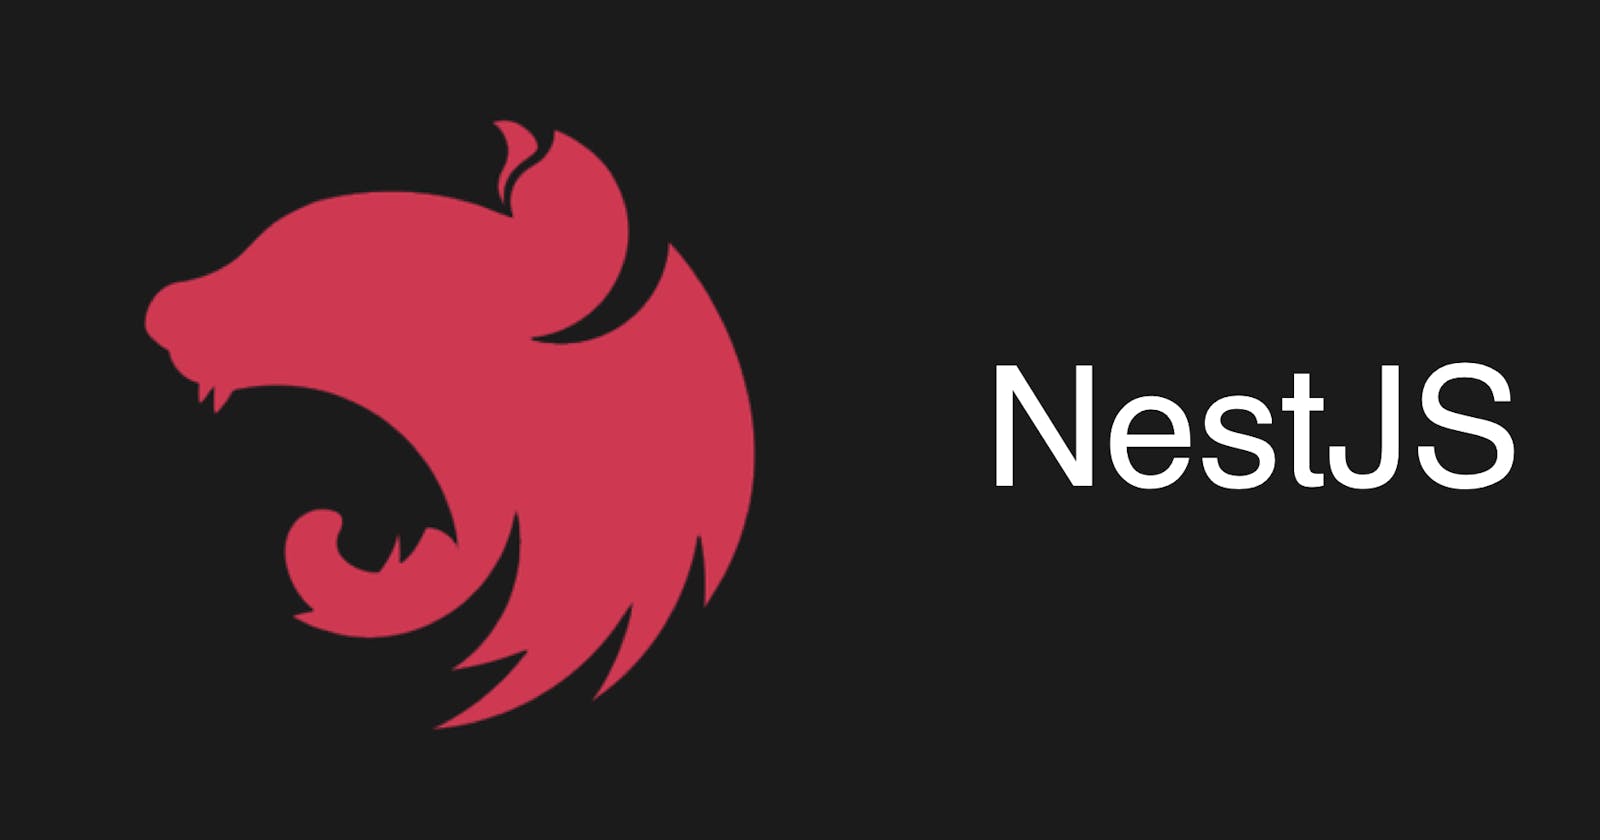 How to set up your first Nest.js project